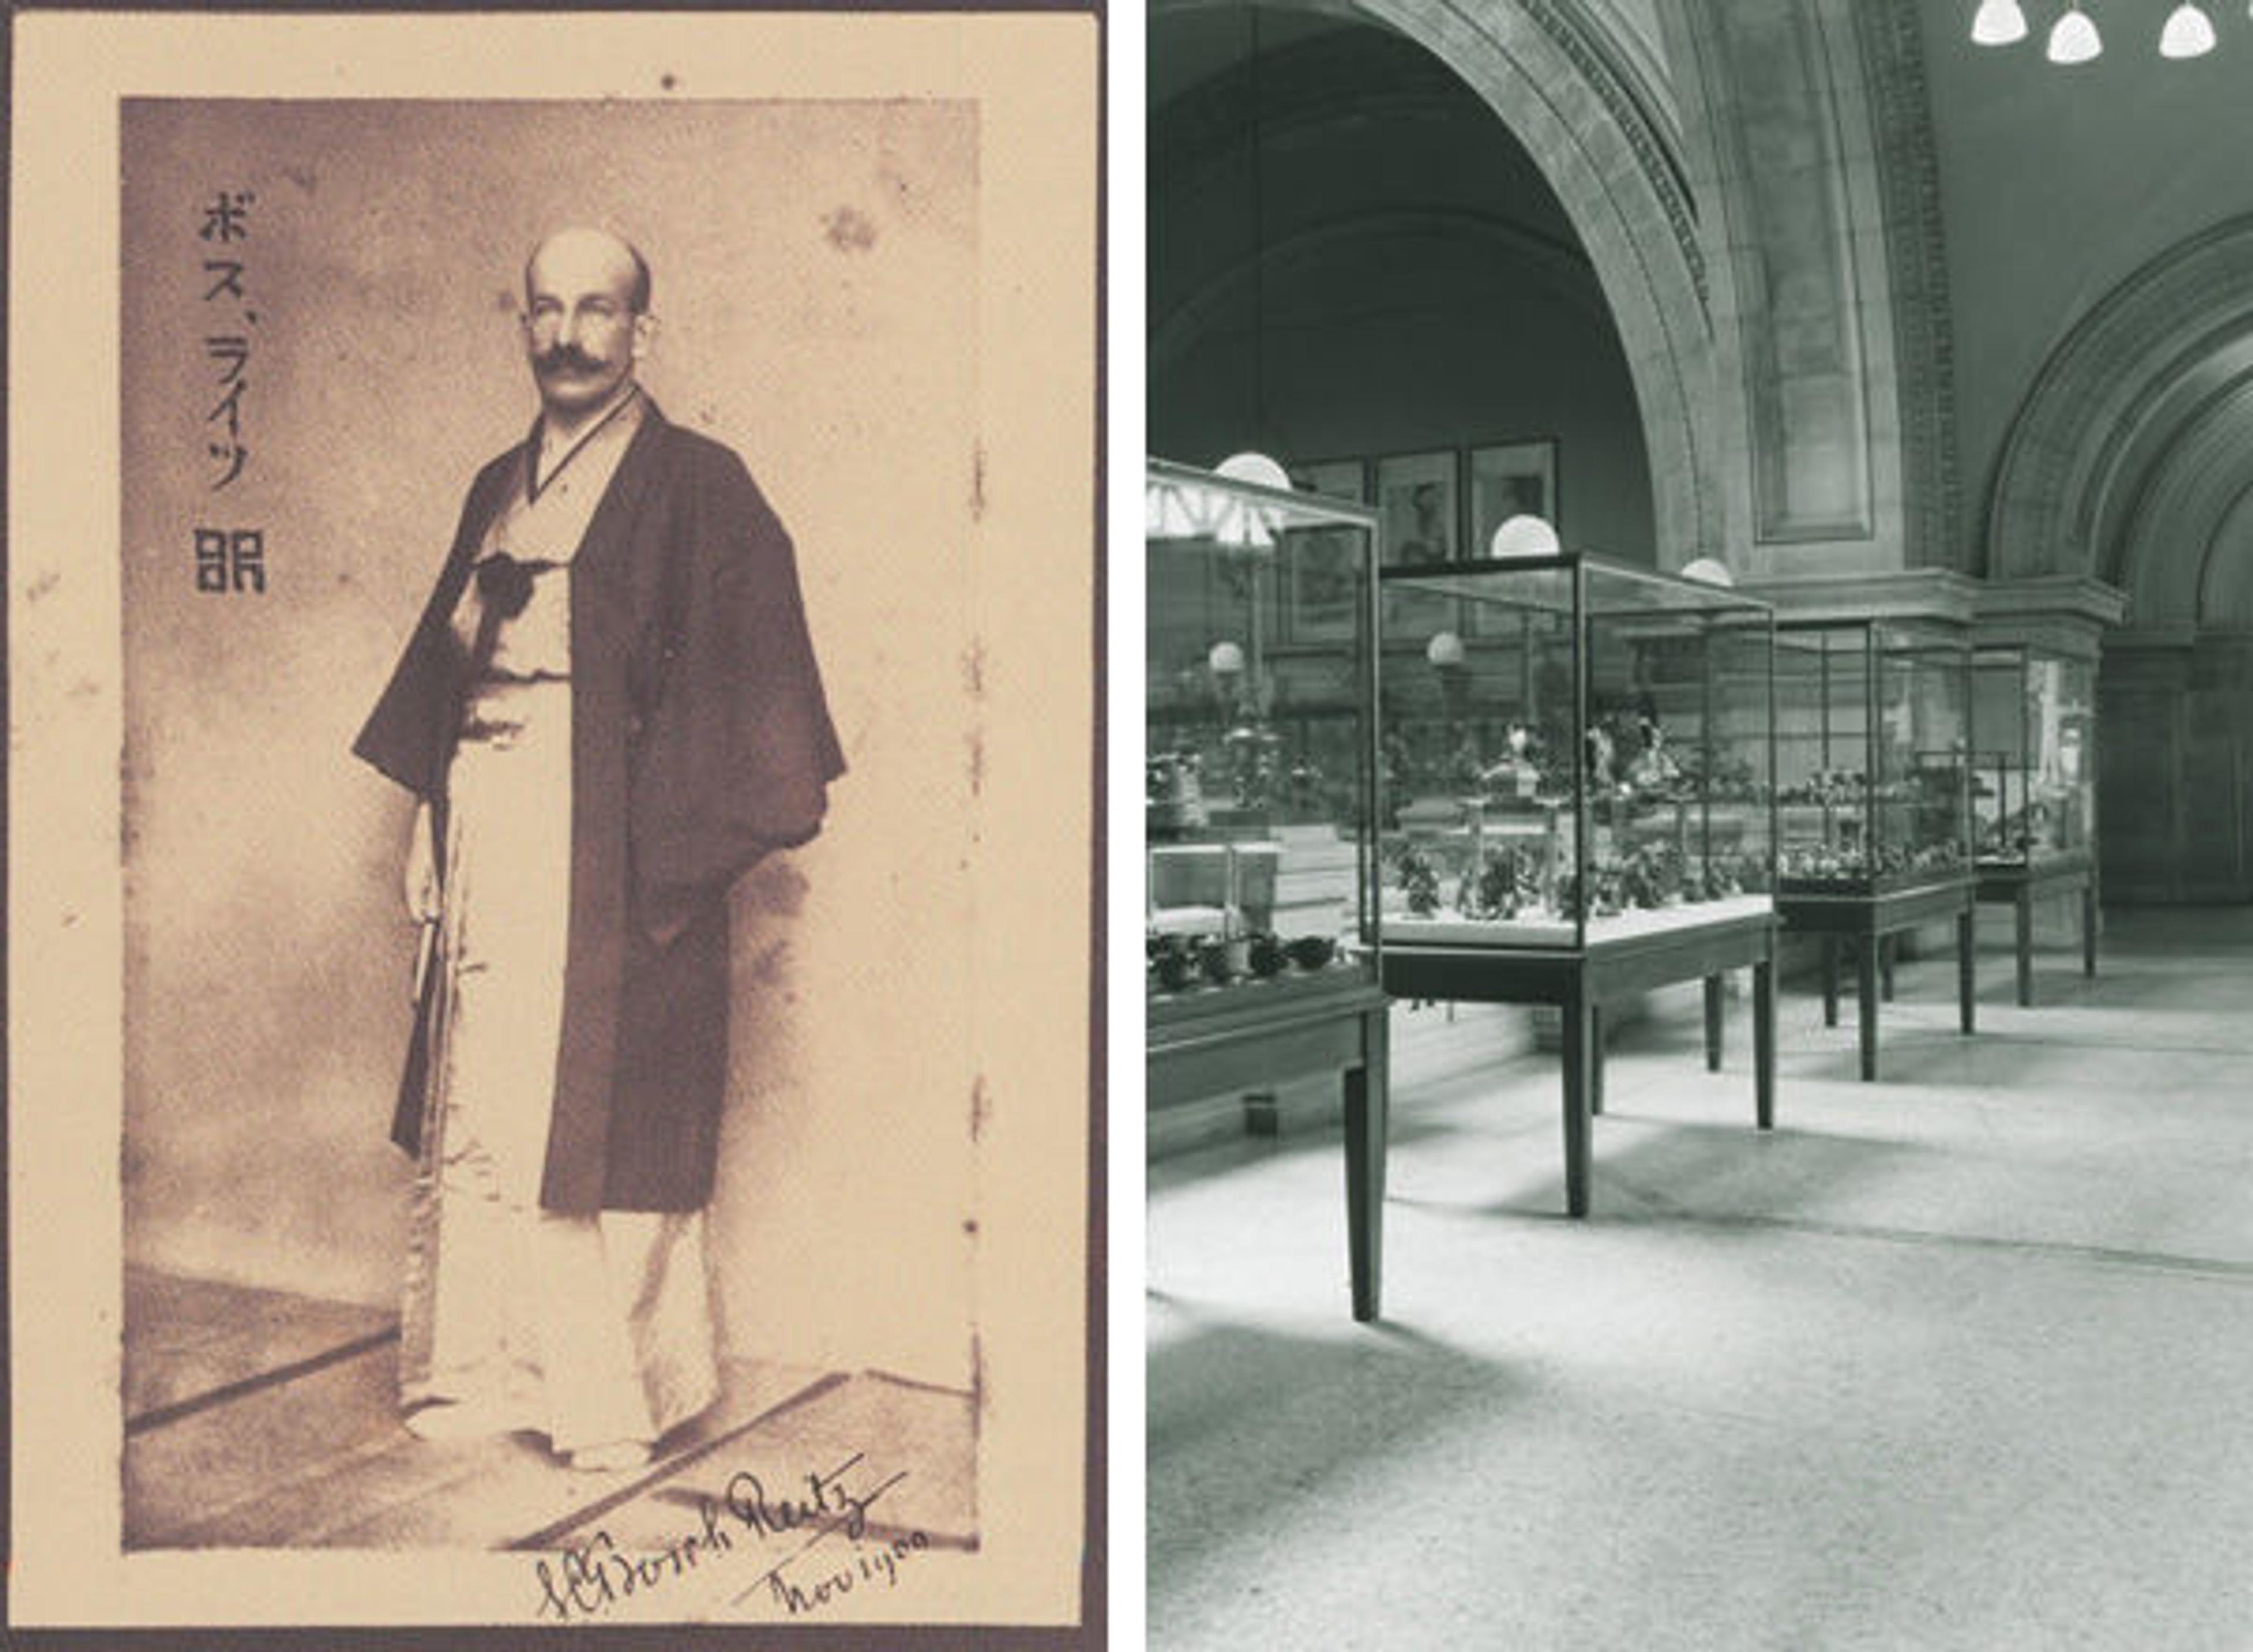 Left: Sigisbert Chretien Bosch Reitz. Photographed in Japan in 1900. Right: The earliest space dedicated to "Far Eastern" art was the Great Hall Balcony (now gallery 202). Photographed in 1933